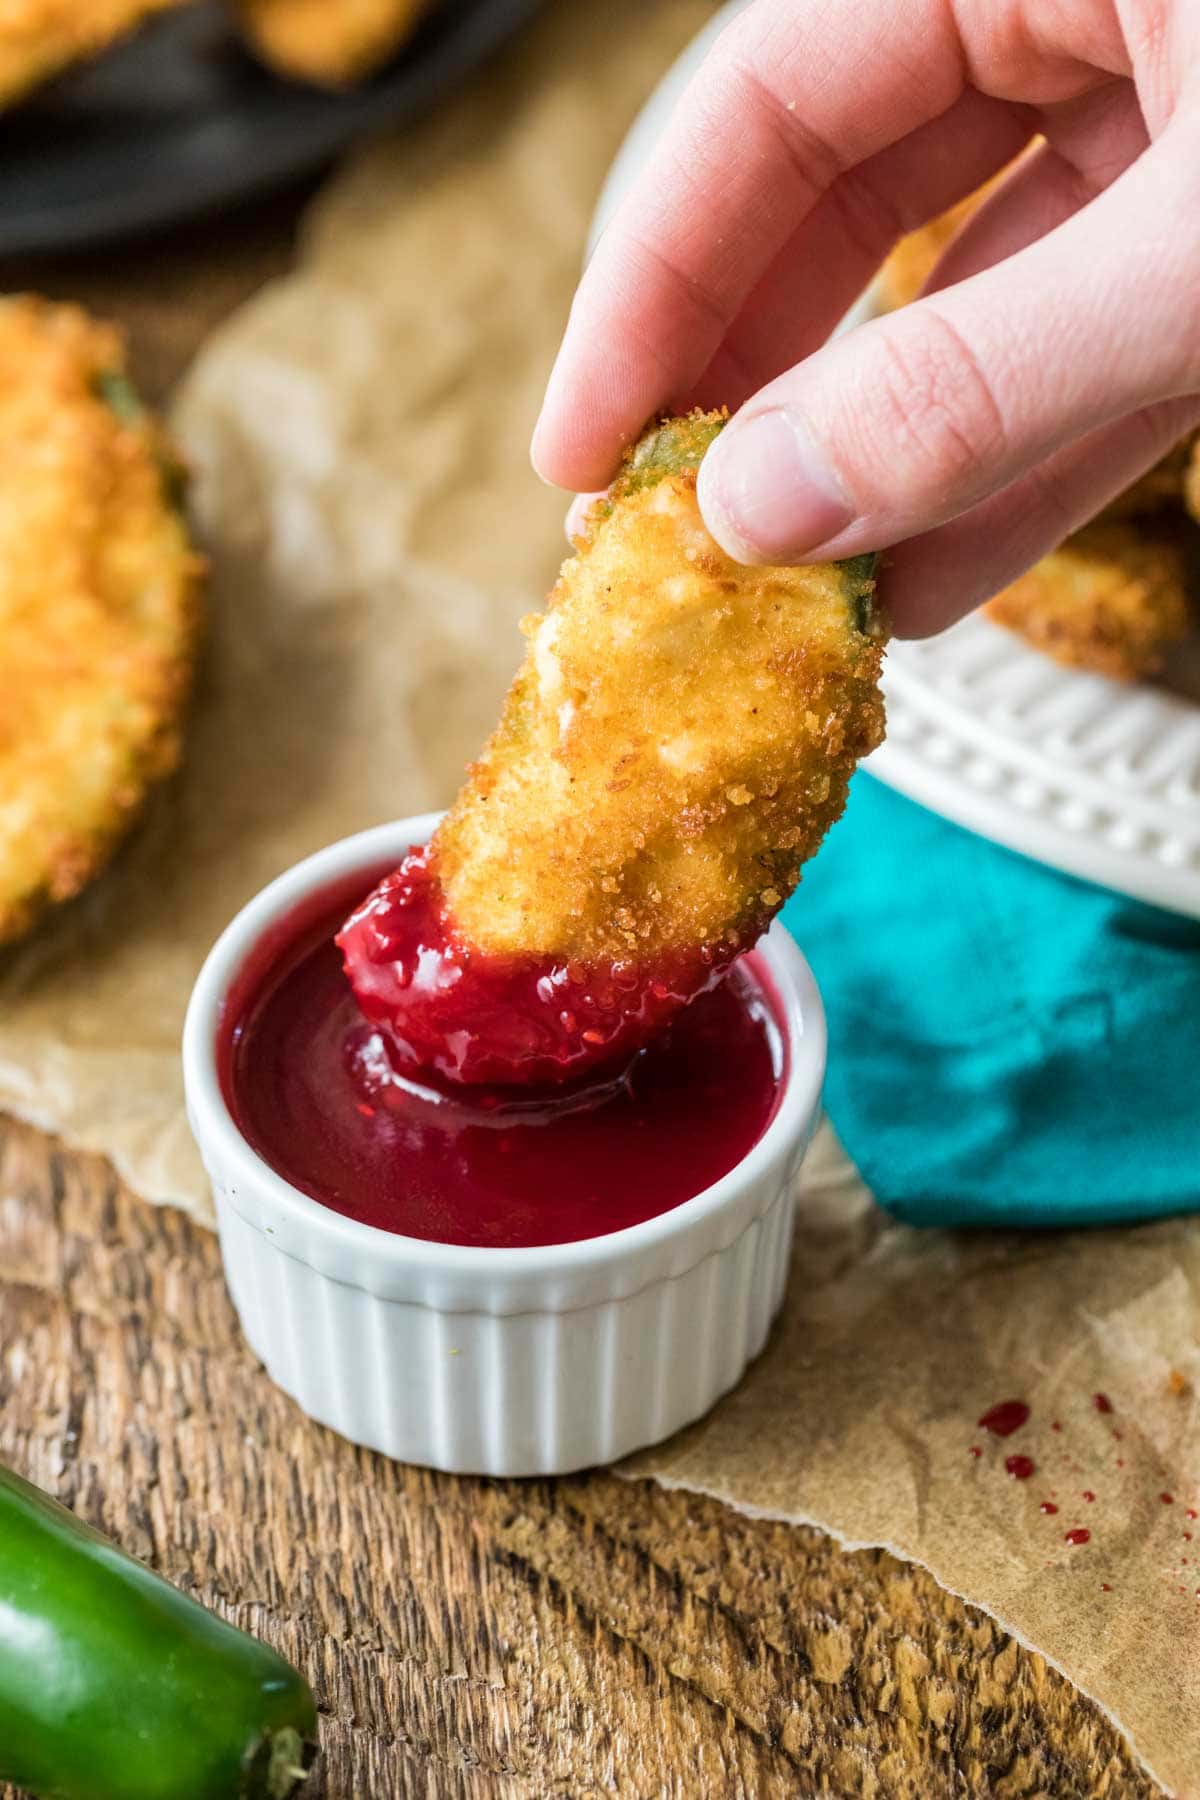 Jalapeno popper being dipped into a raspberry dipping sauce.